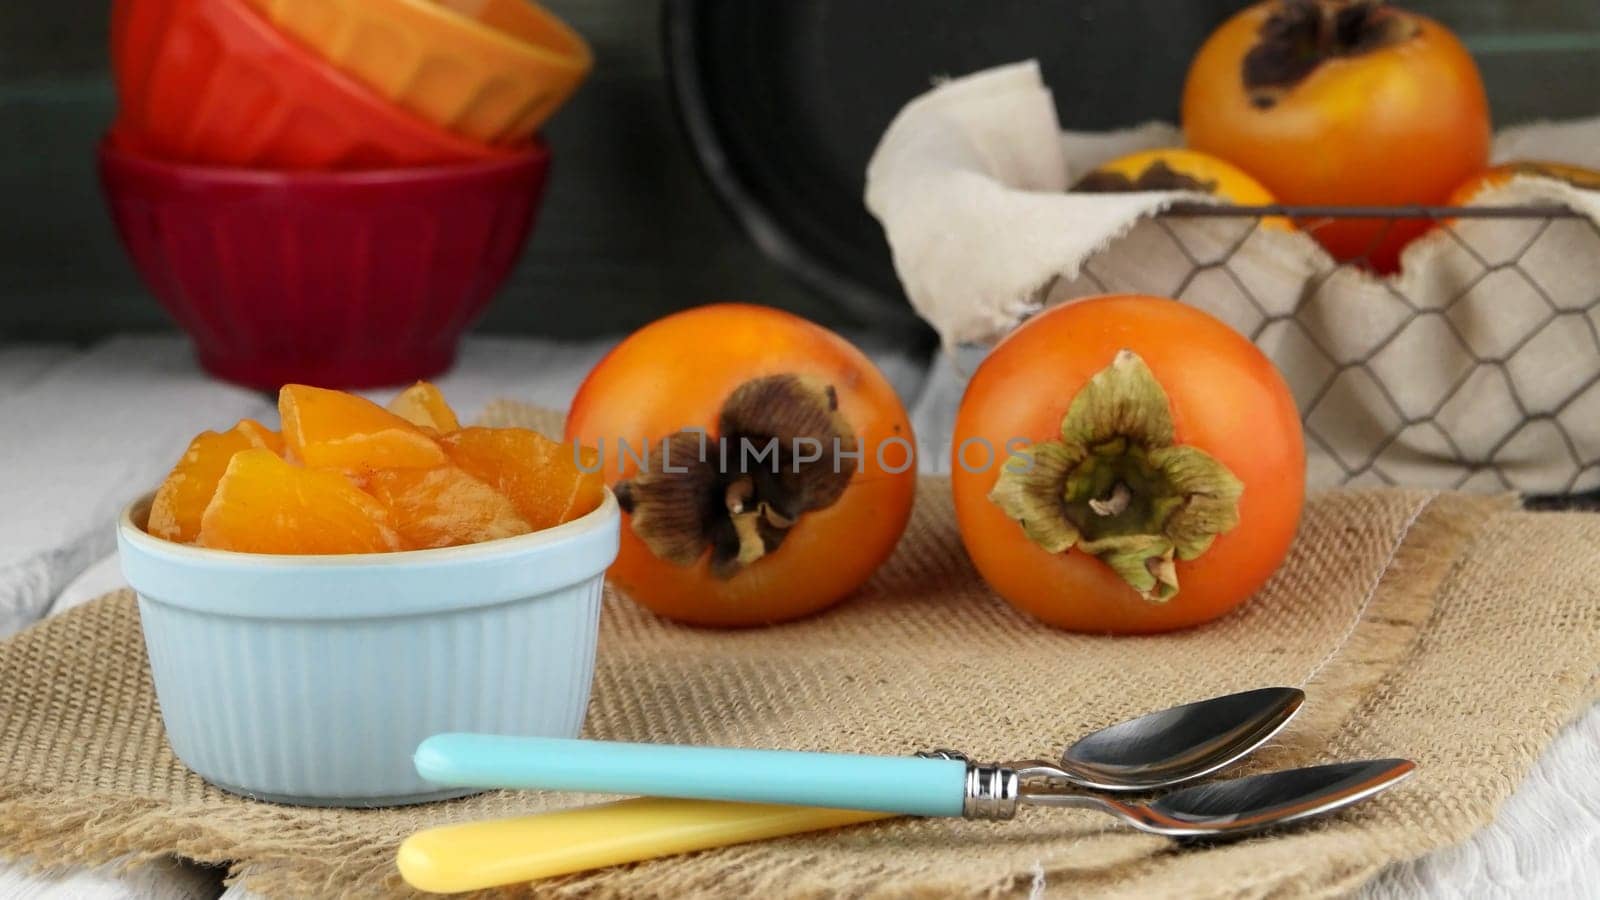 Fresh ripe persimmon on a wooden table.